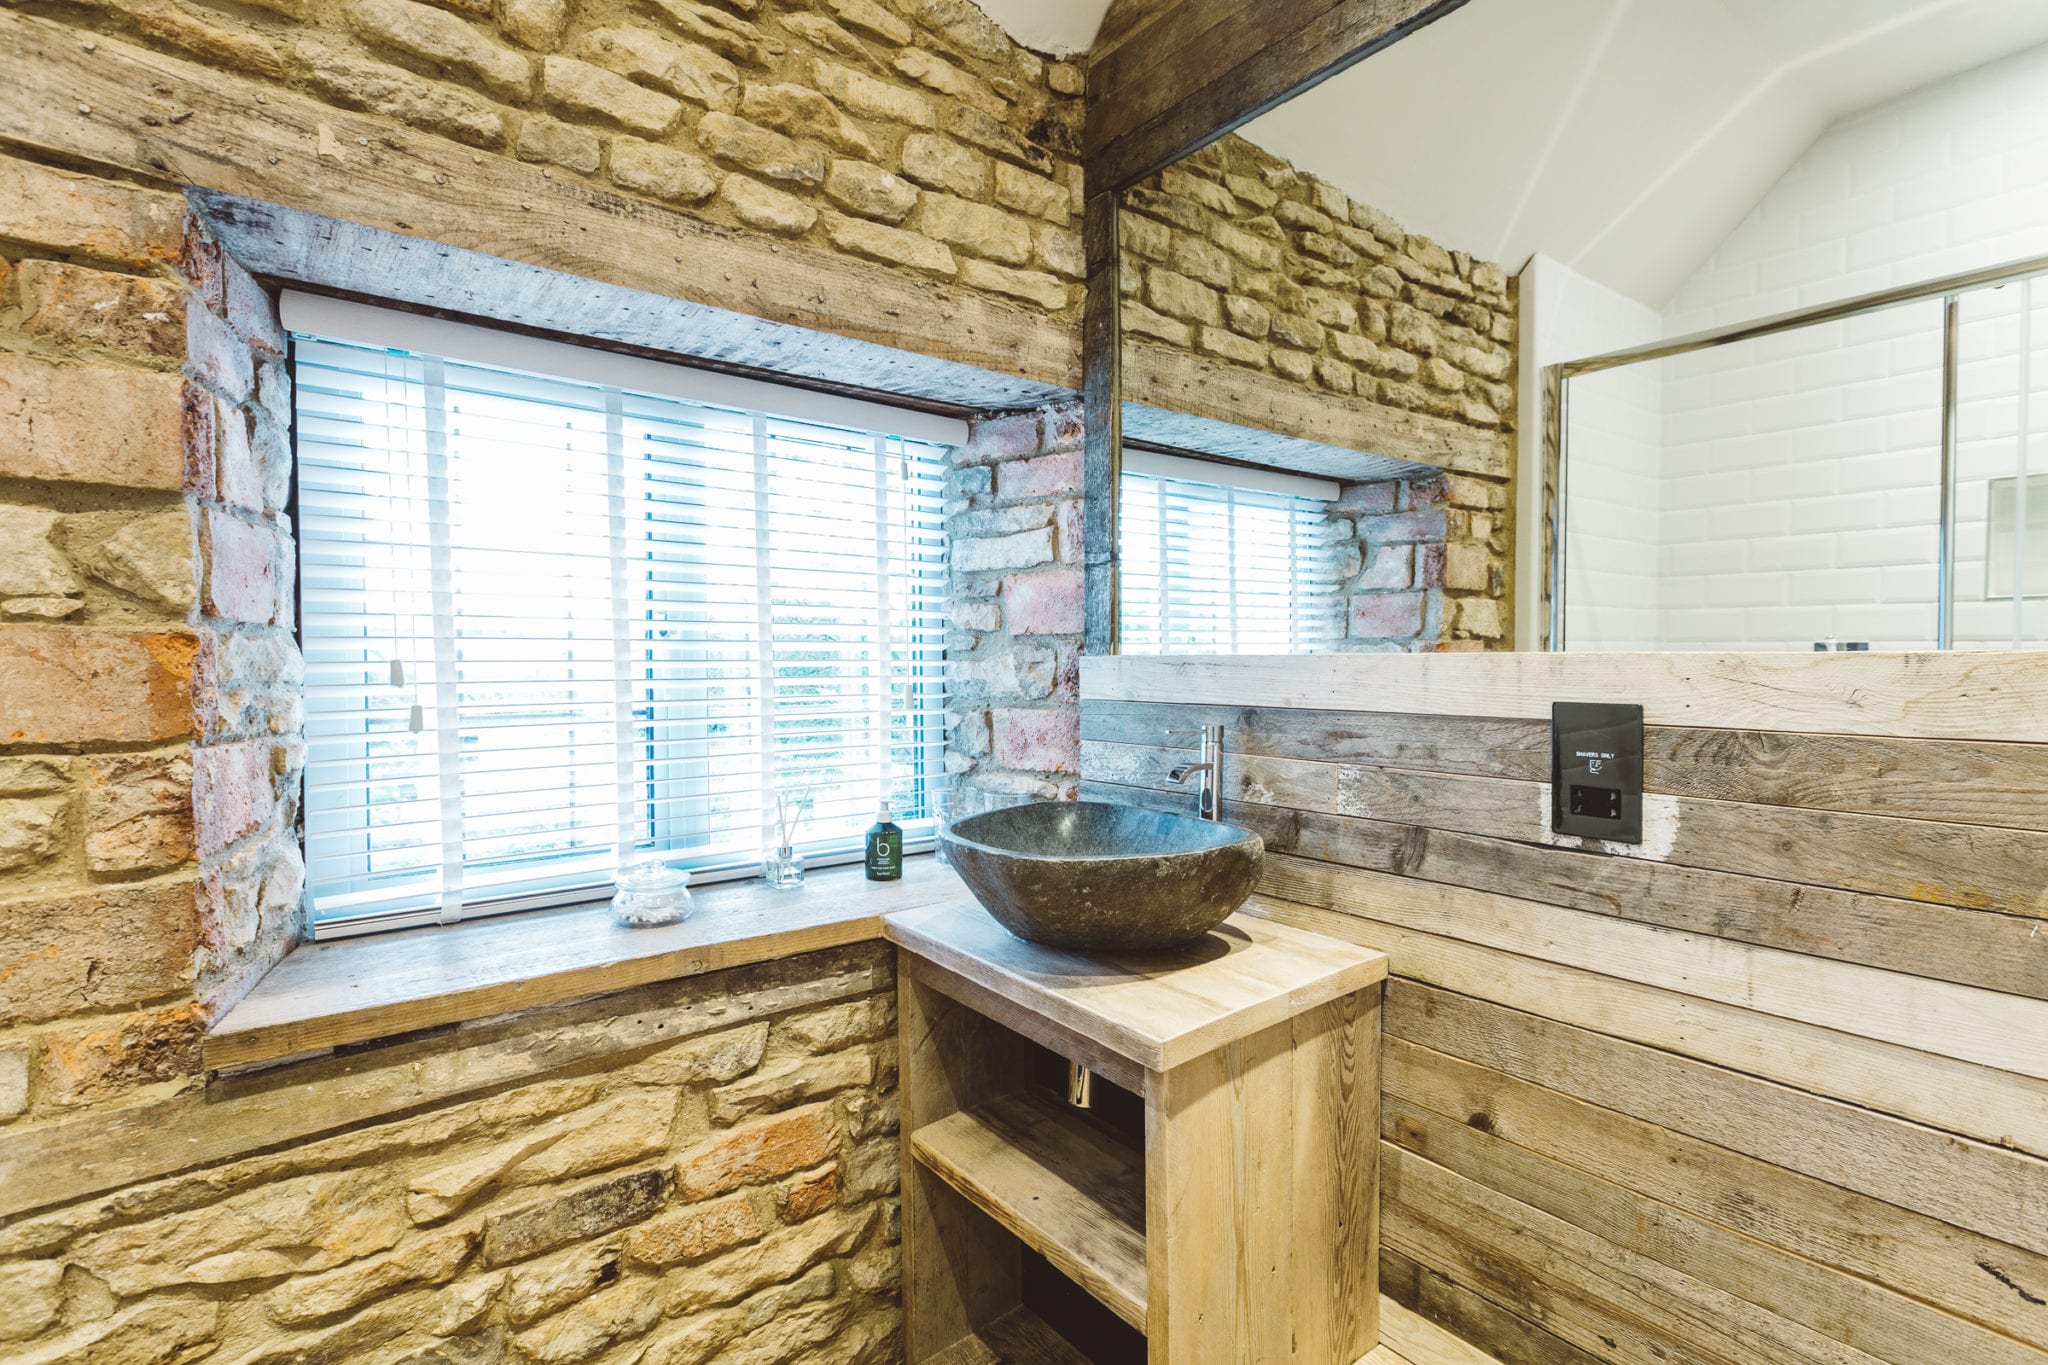 A bathroom with exposed stone walls